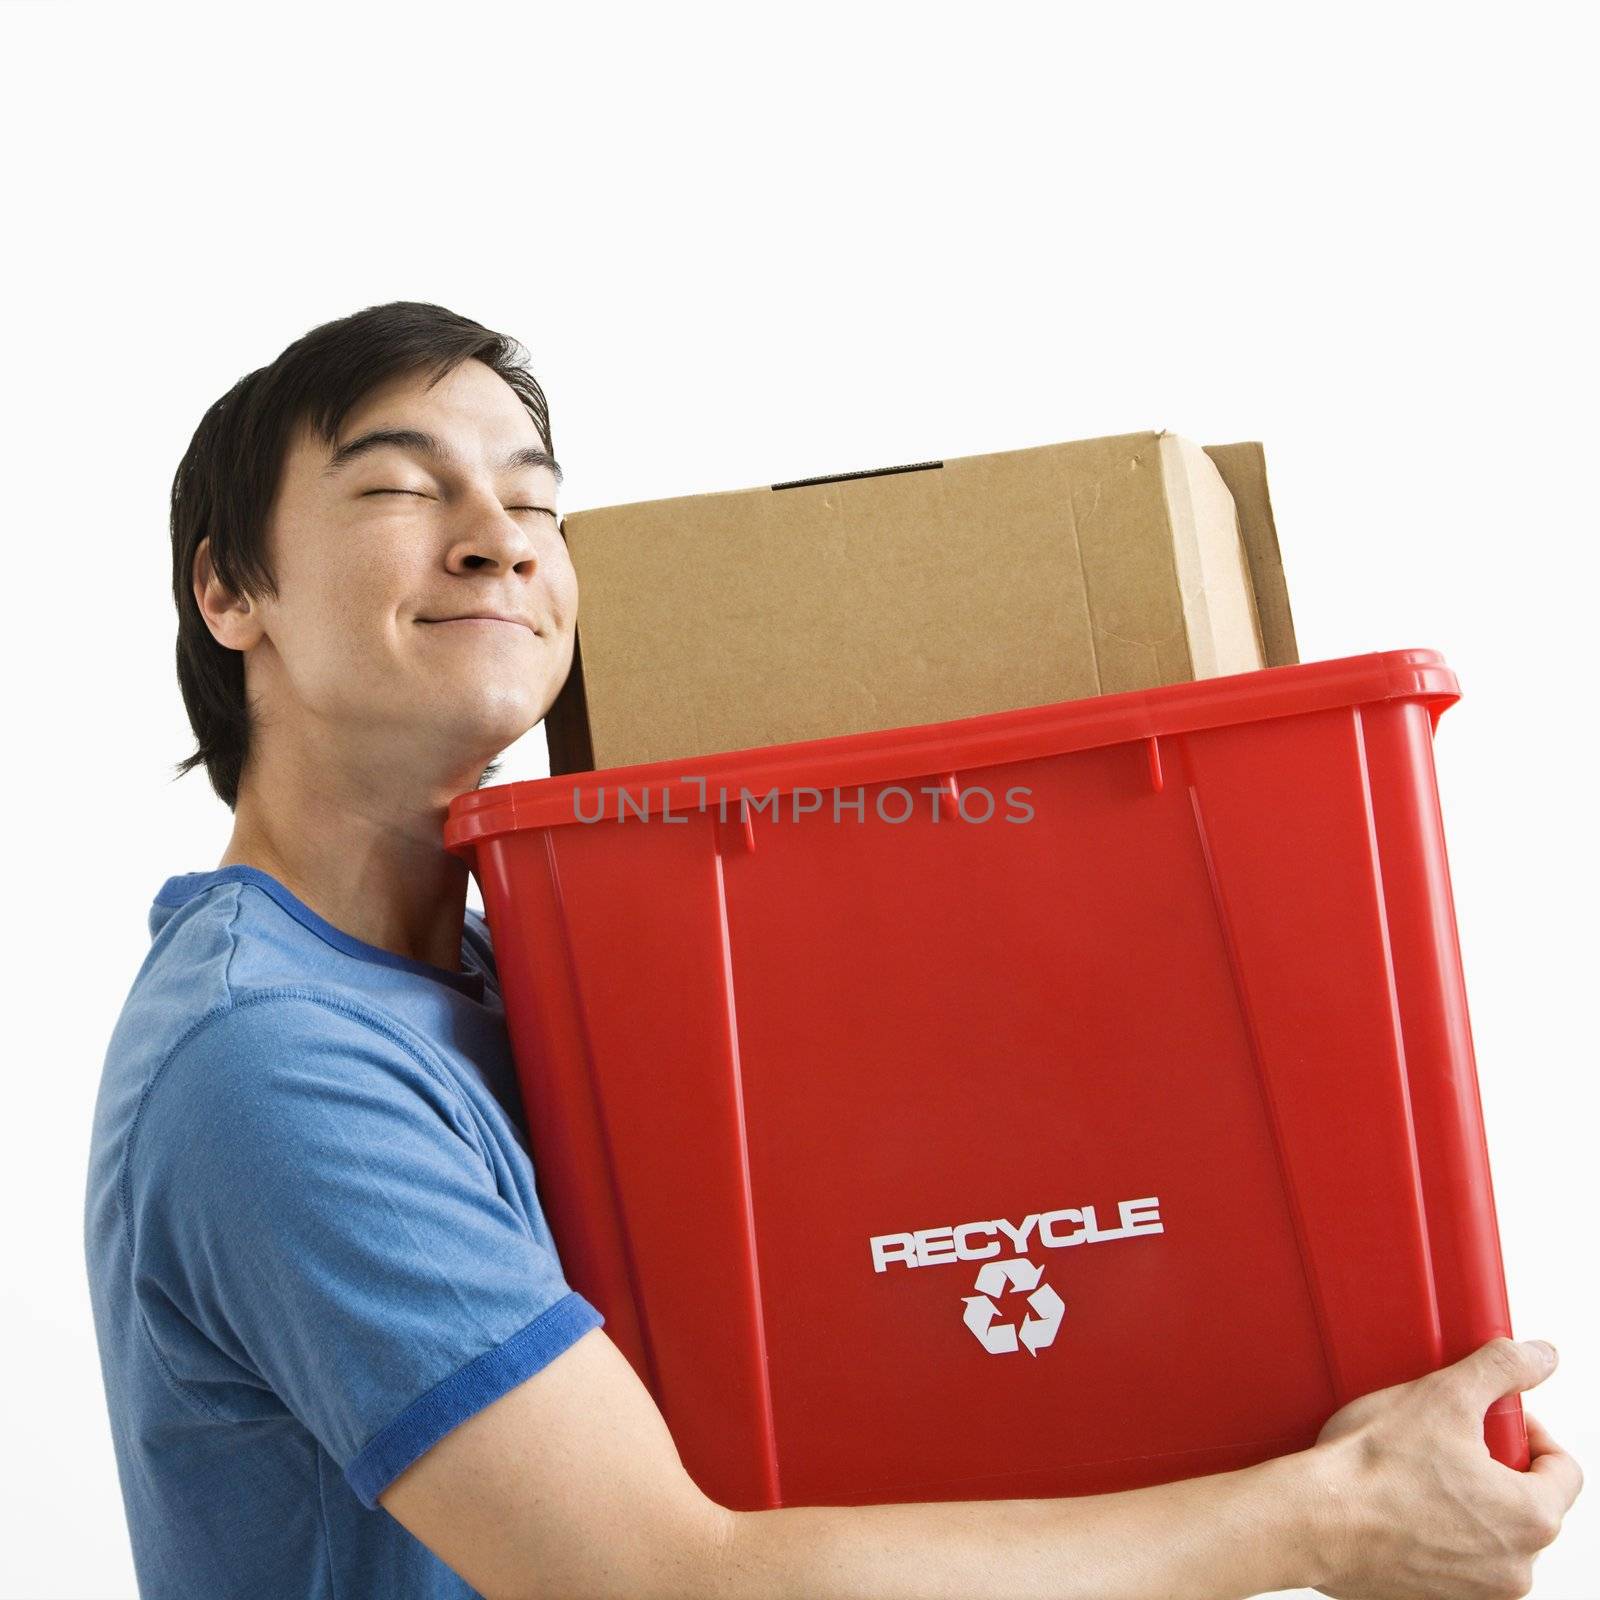 Portrait of smiling Asian young man holding recycling bin.